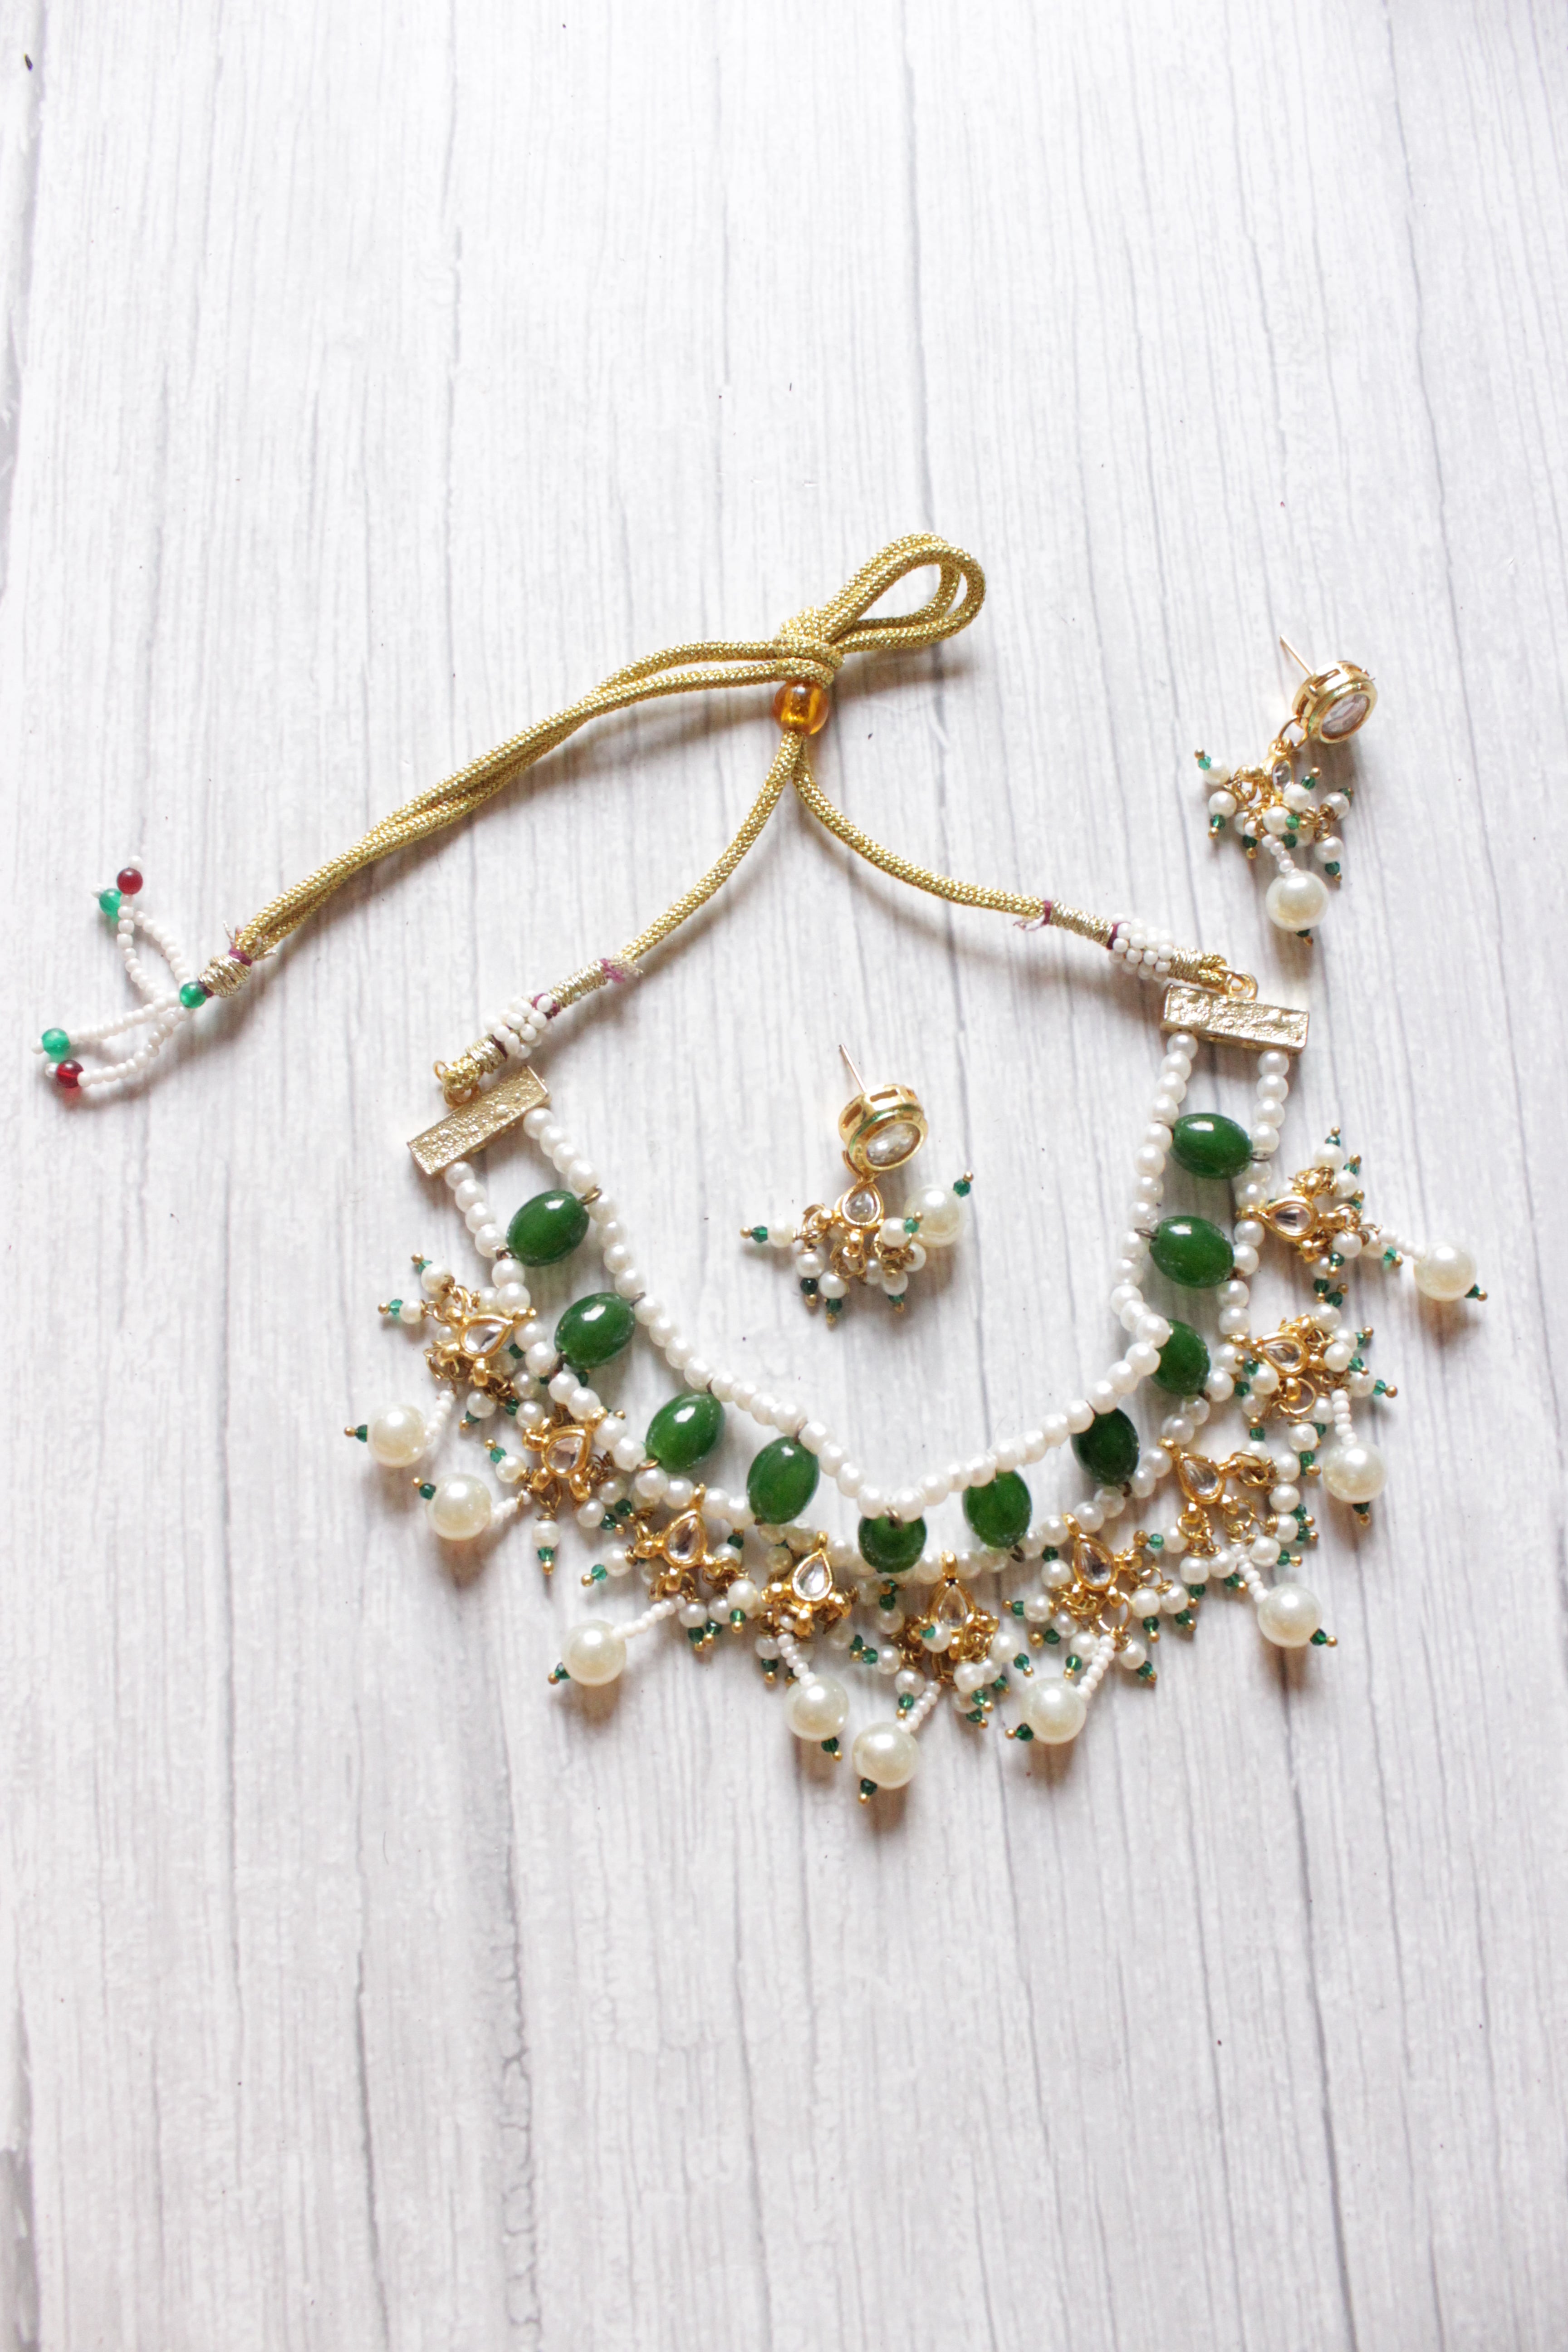 Green Glass Beads and White Beads Braided Adjustable Length Festive Choker Necklace Set